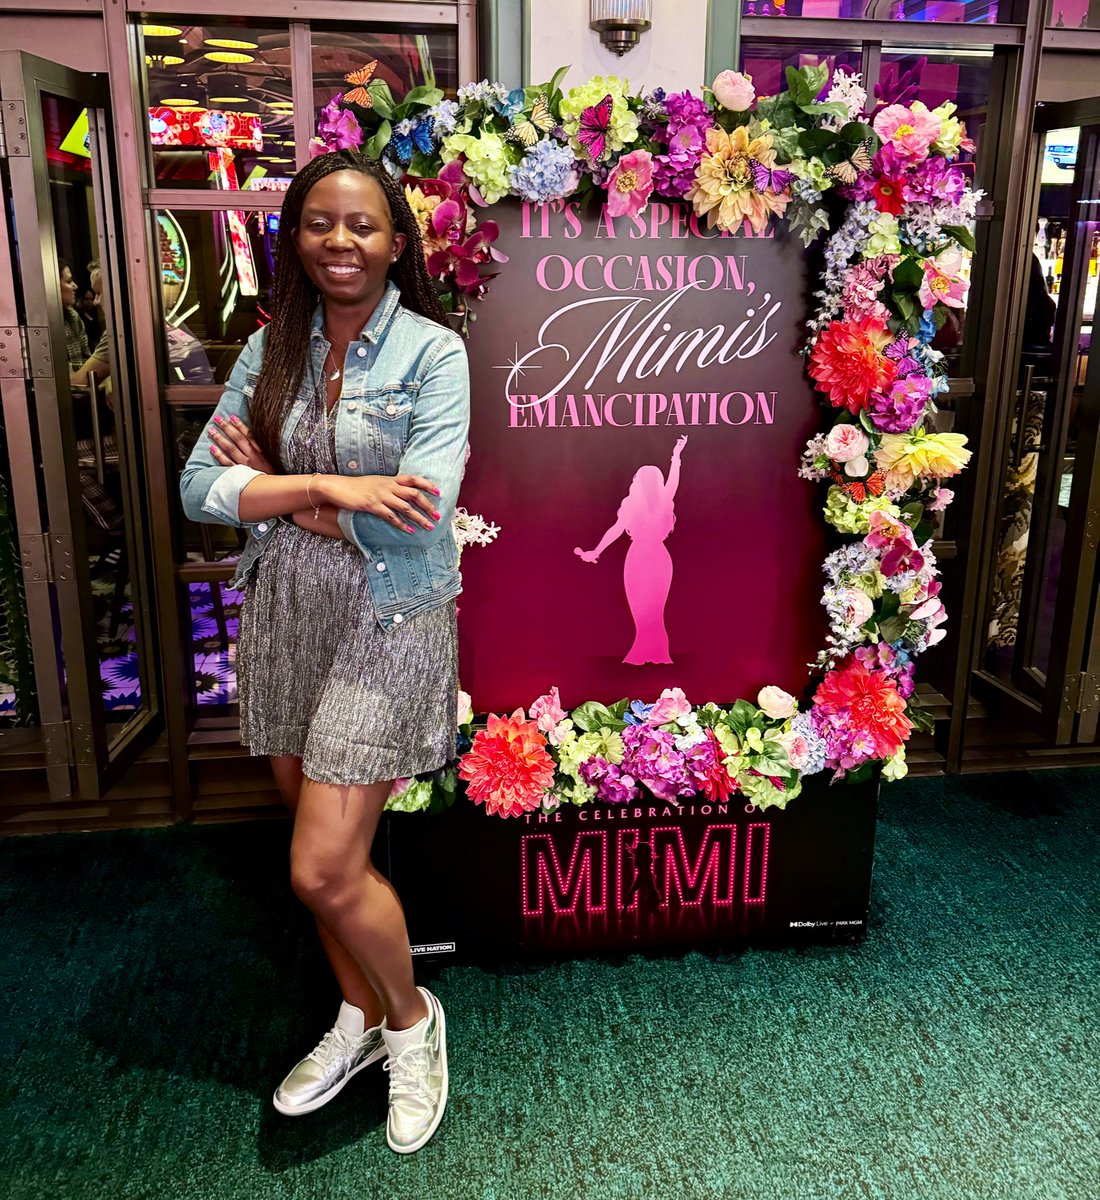 To wrap up a weekend with my favorite #popdivas, I saw the finale of the first leg of @MariahCarey’s Vegas Residency last night at @parkmgm #DolbyLive! It’s always a special occasion with Mimi!!! 🦋💕 . . . #mariah #mariahvegas #lambily #thecelebrationofmimi #mariahcarey